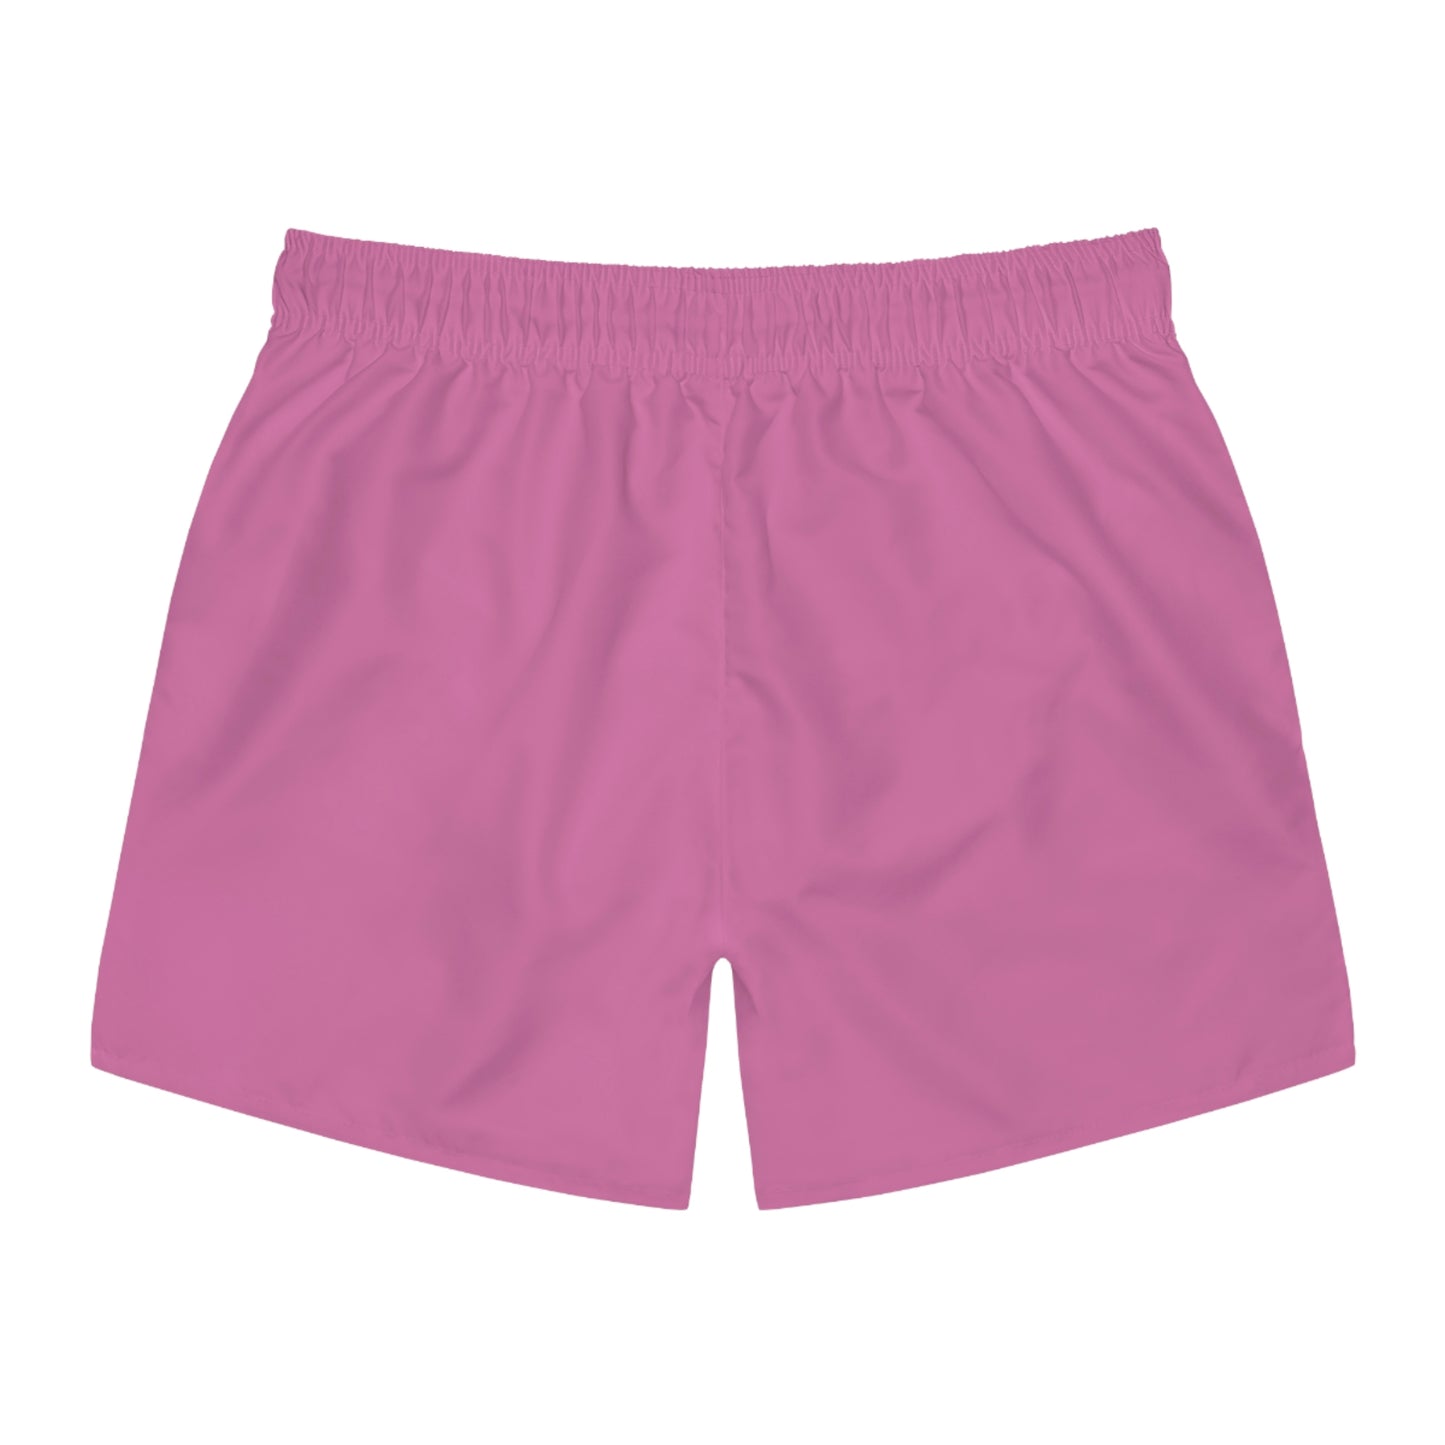 Born In Blood Pink Shorts